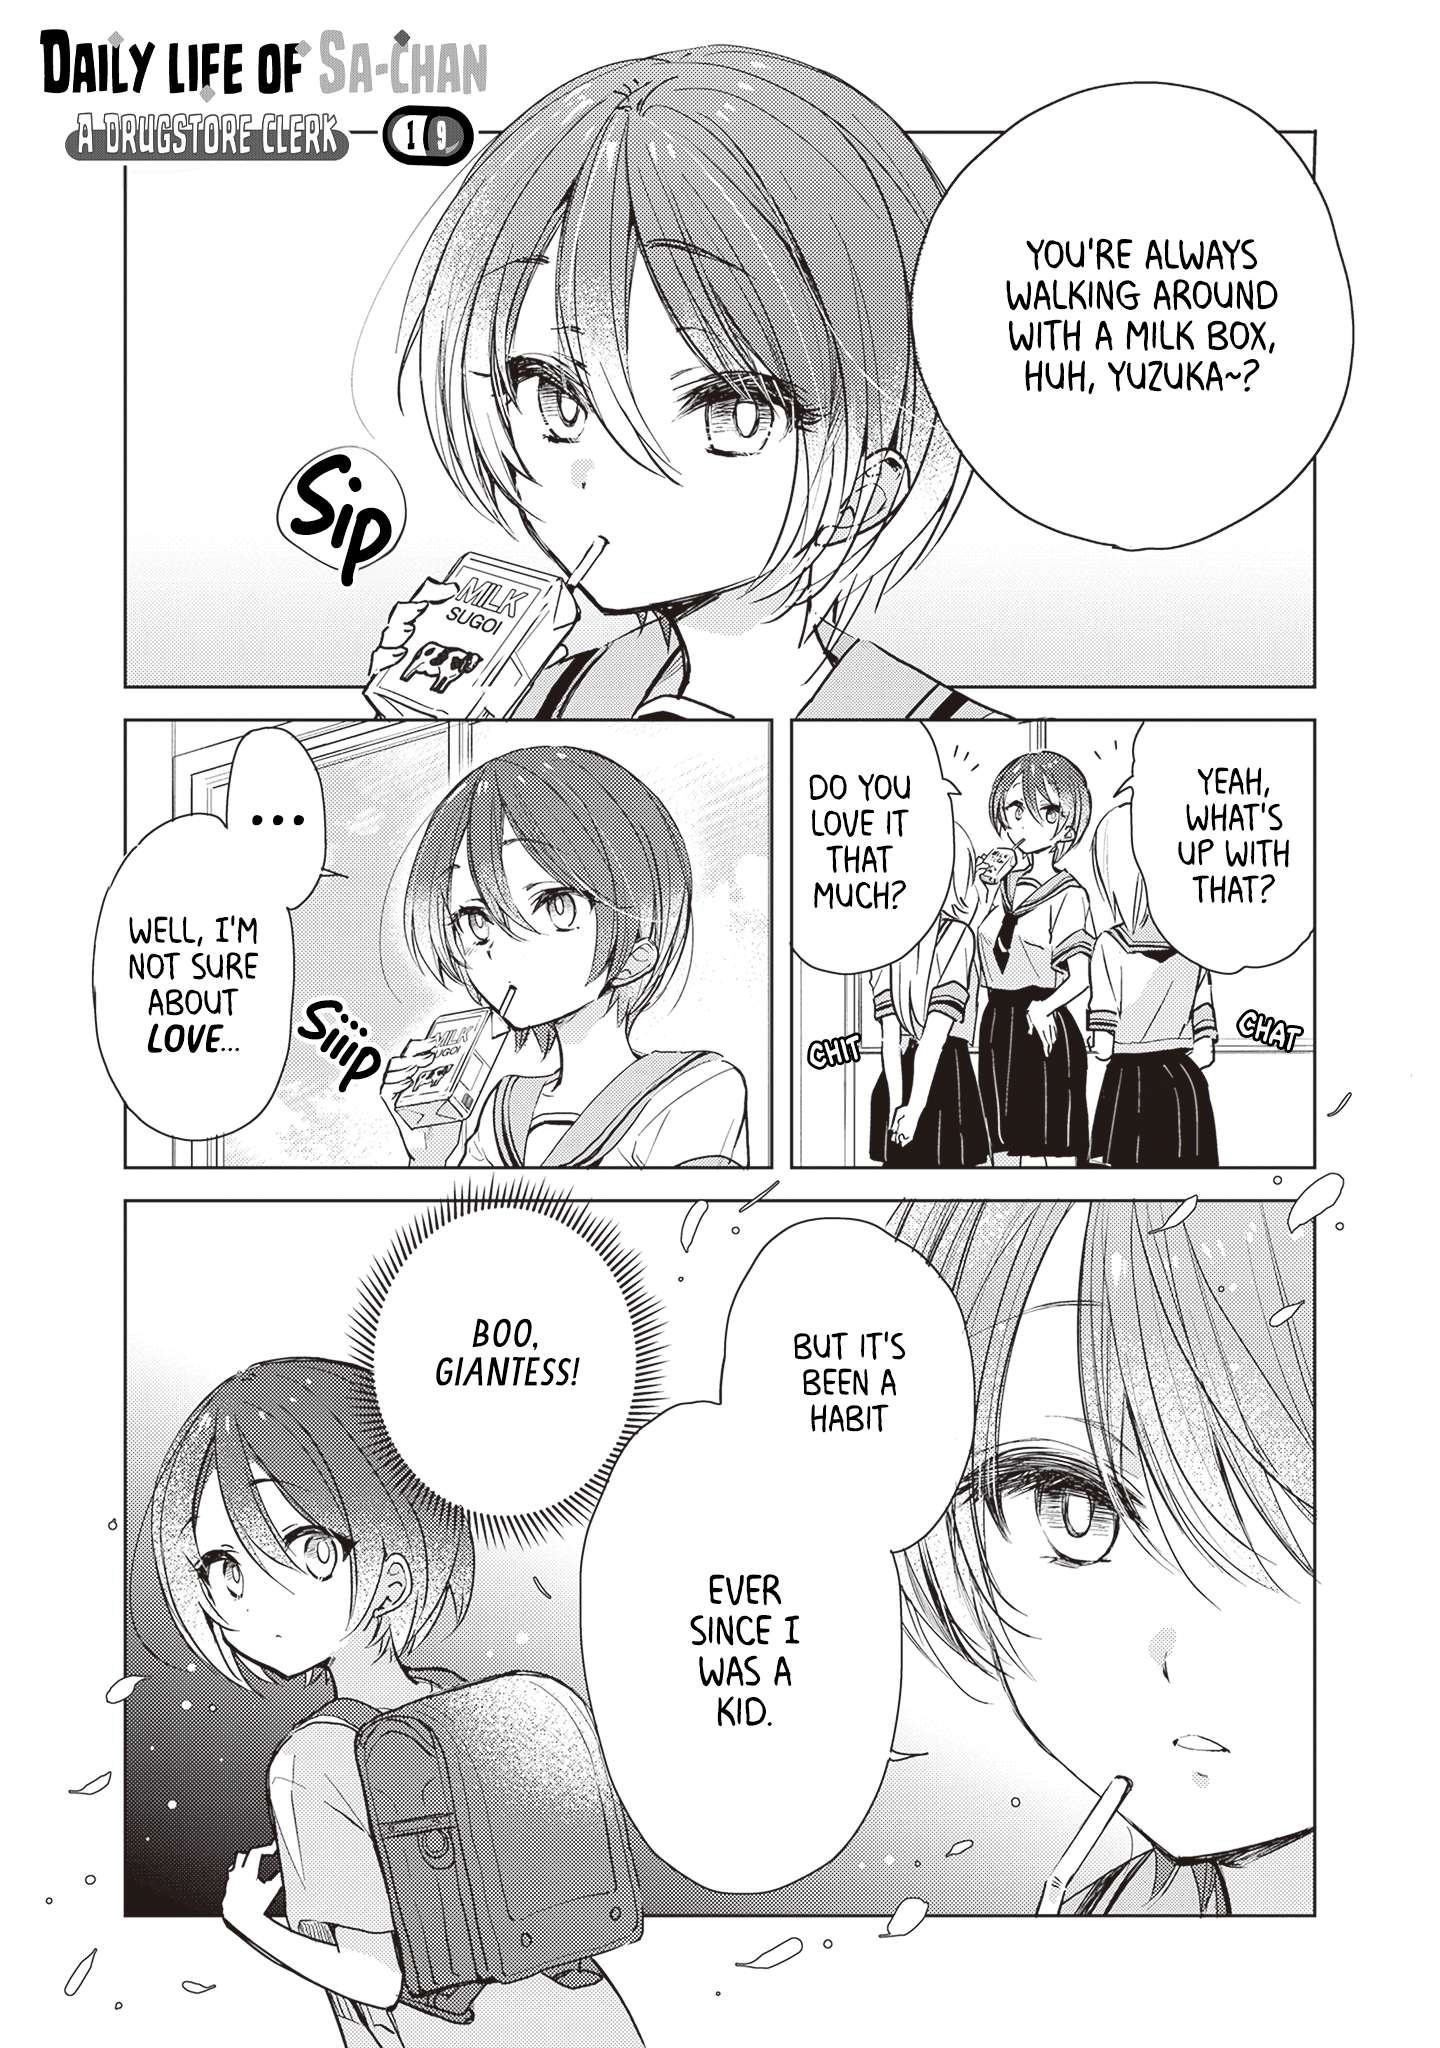 Daily Life Of Sa-Chan, A Drugstore Clerk - chapter 19 - #1